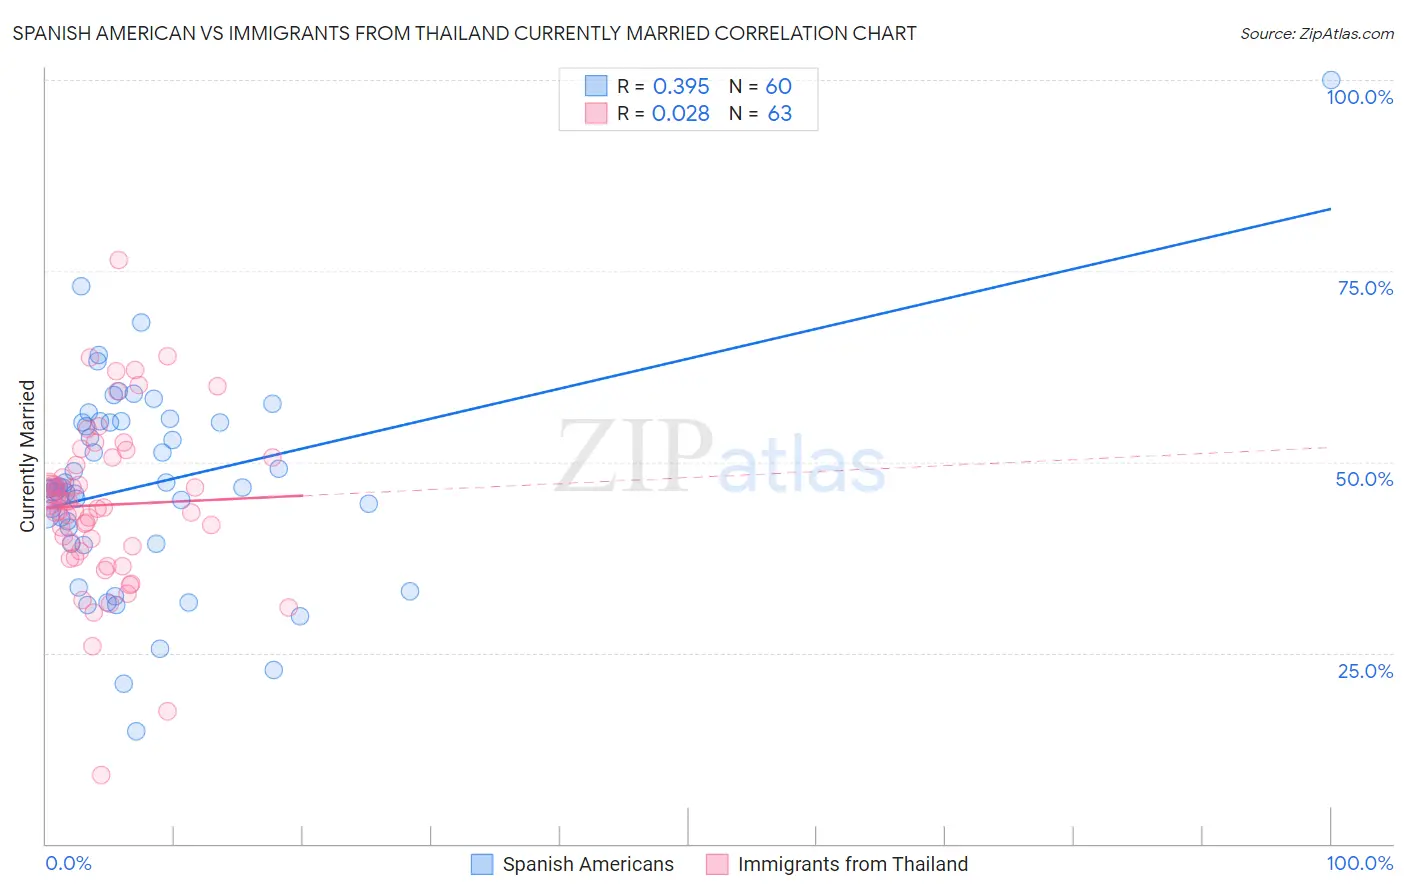 Spanish American vs Immigrants from Thailand Currently Married